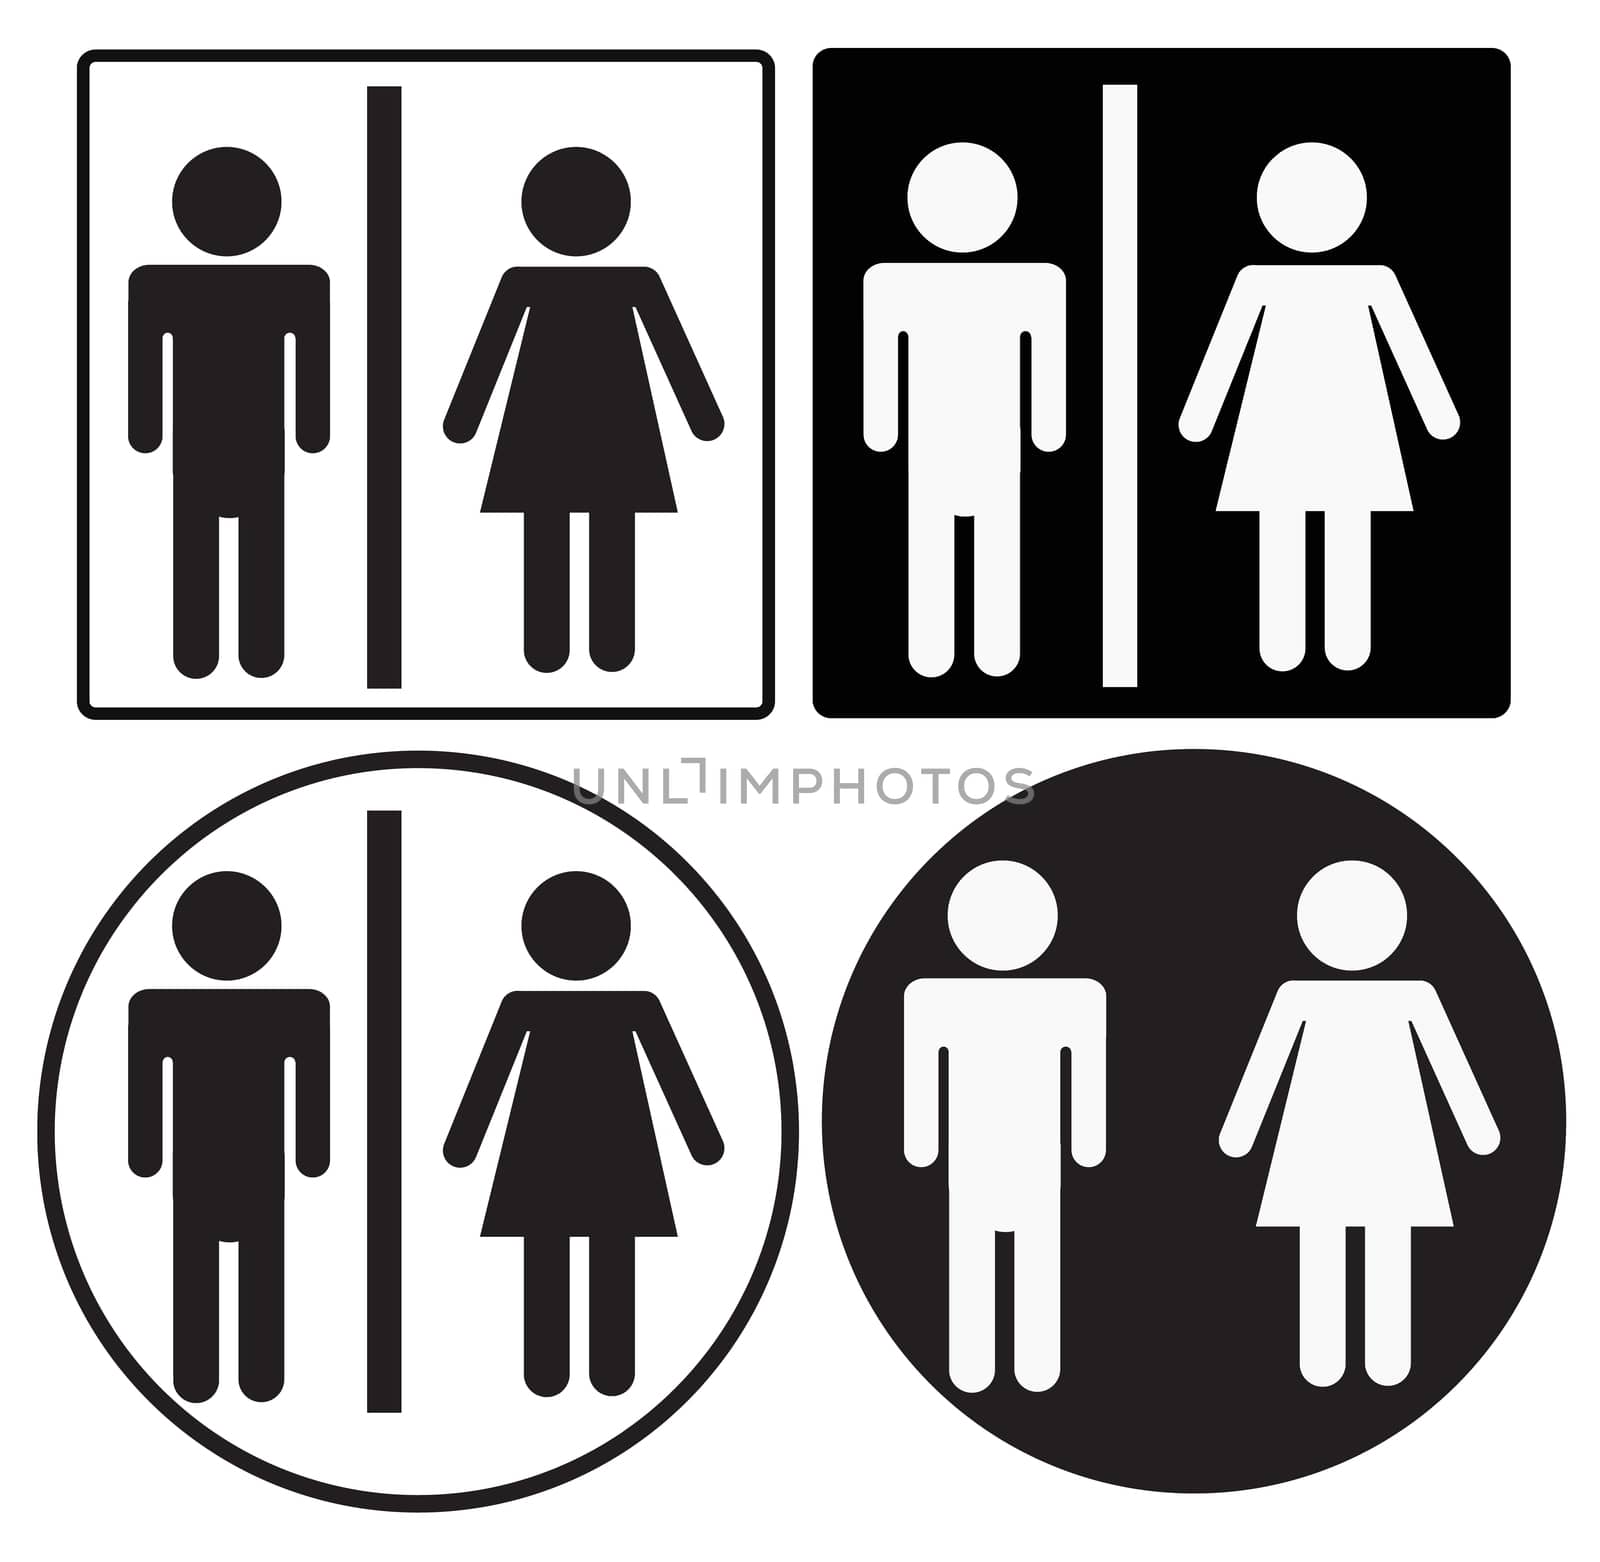 a man and a lady toilet icon on white background. flat style.  toilet icon for your web site design, logo, app, UI. toilet symbol. a man and a lady toilet sign